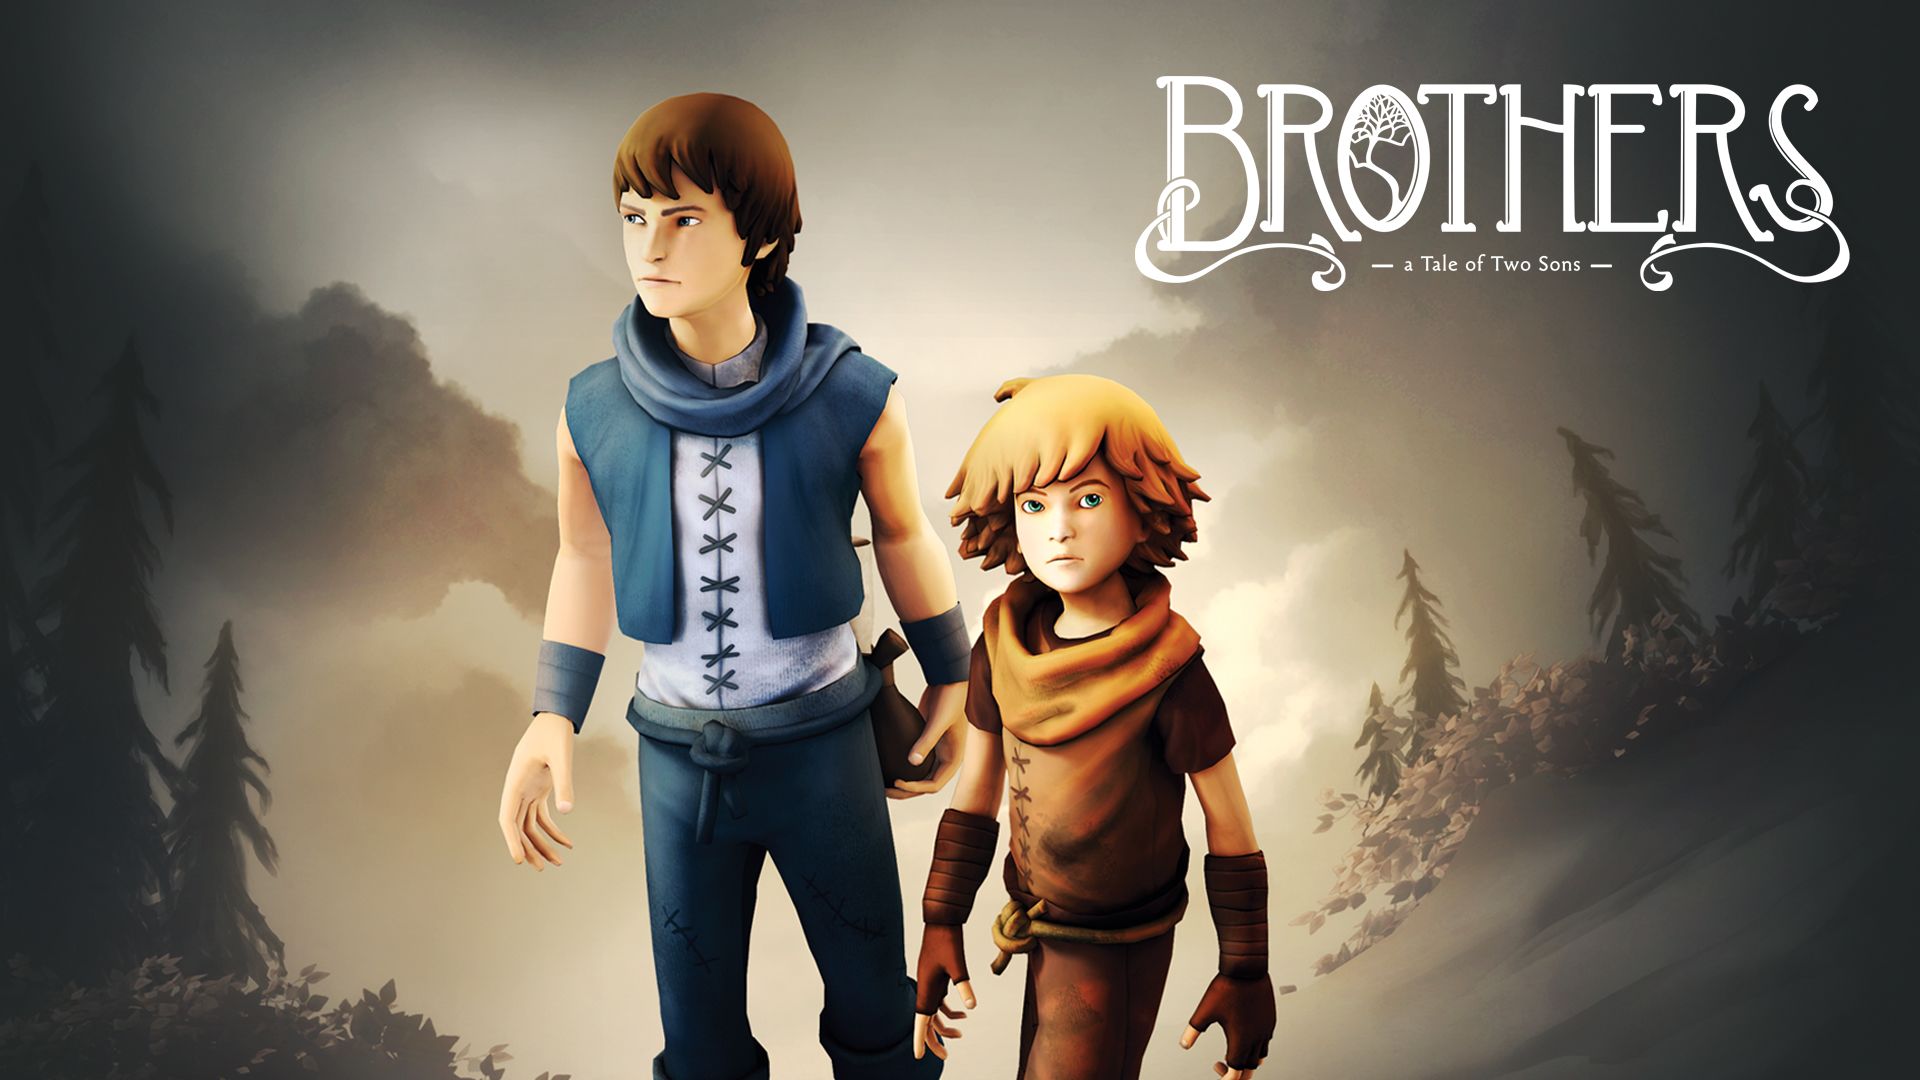 Brothers a Tale of two sons ps4. Brothers: a Tale of two sons обложка. Brothers: a Tale of two sons | Player one волшебное дерево. Two brothers ps4